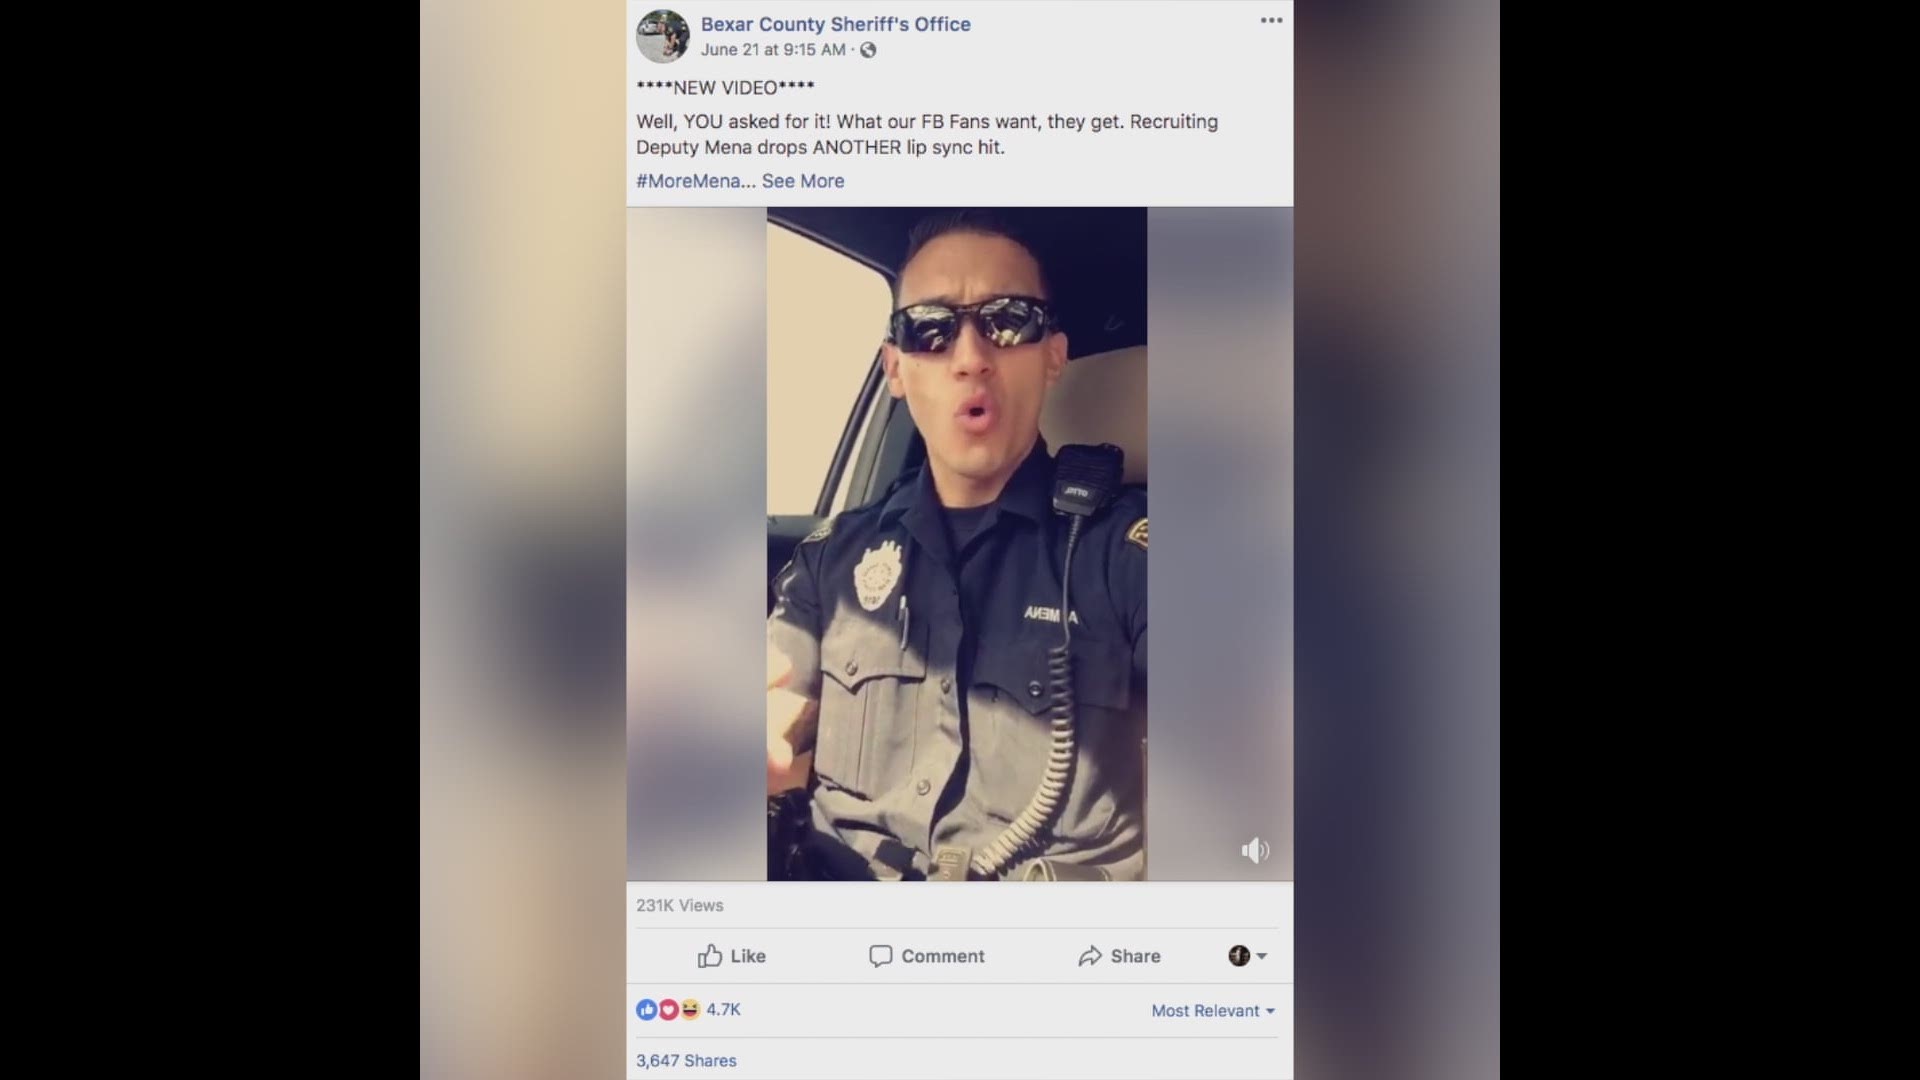 Deputy Alexander Mena talks with KENS 5 about how the viral craze started and how people are responding to his Internet fame.